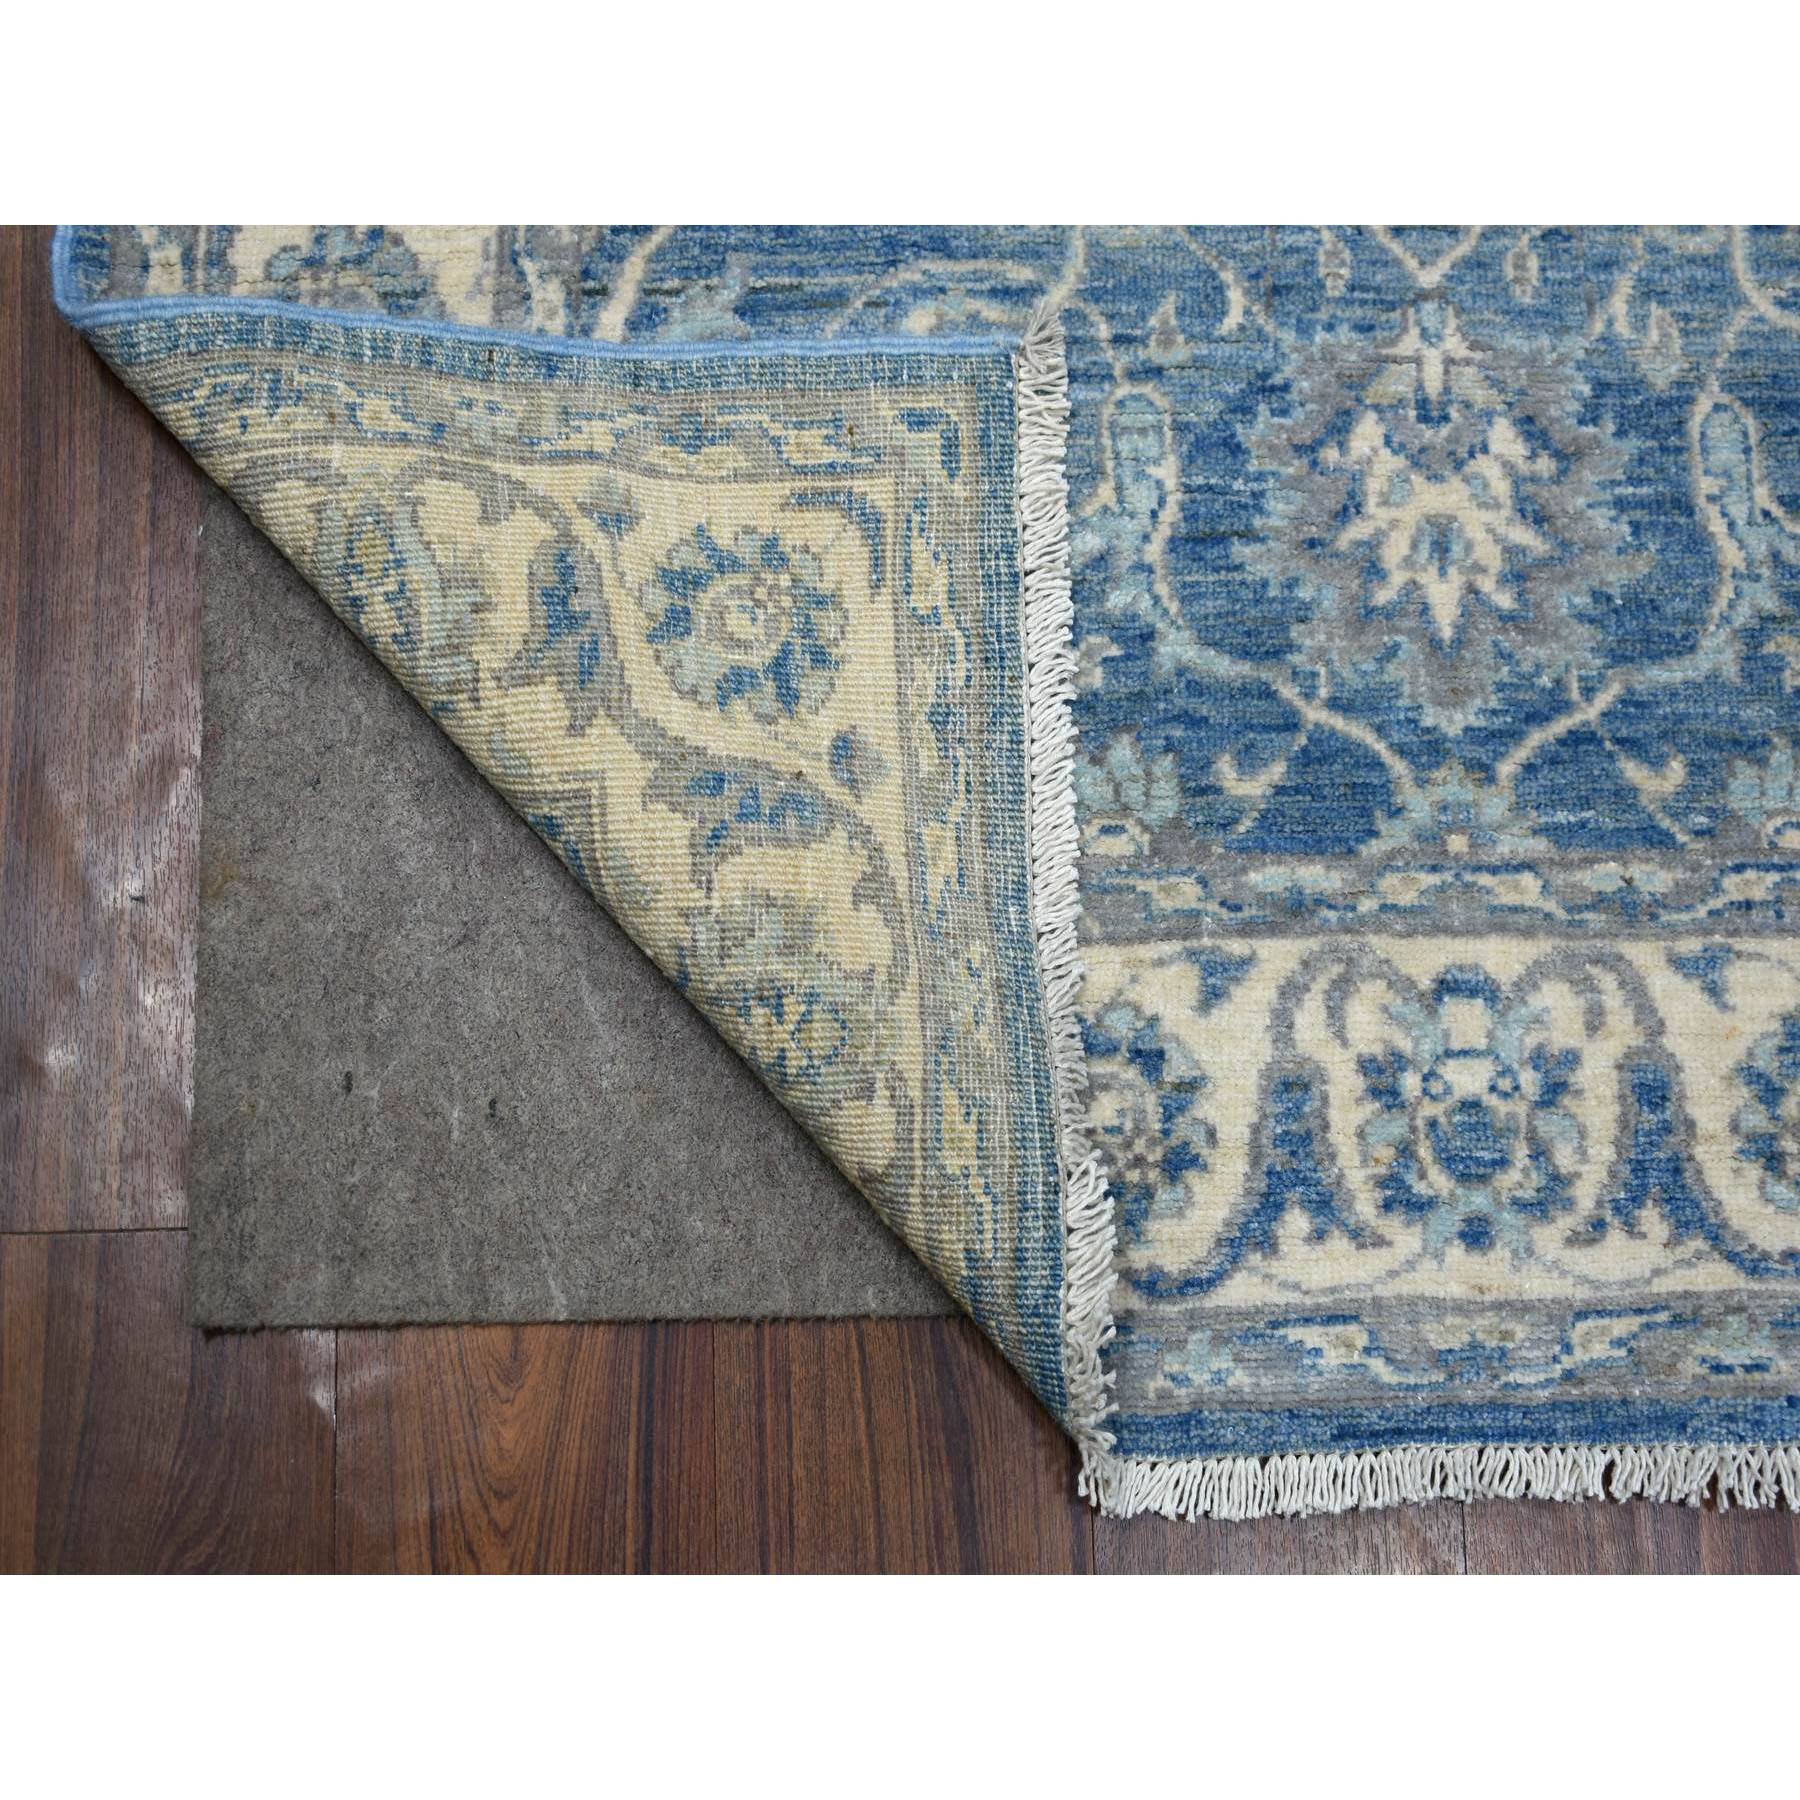 3'10"x5'10" Denim Blue, Hand Woven Densely Woven Fine Peshawar with Mahal Design, Pliable Wool Natural Dyes, Oriental Rug 